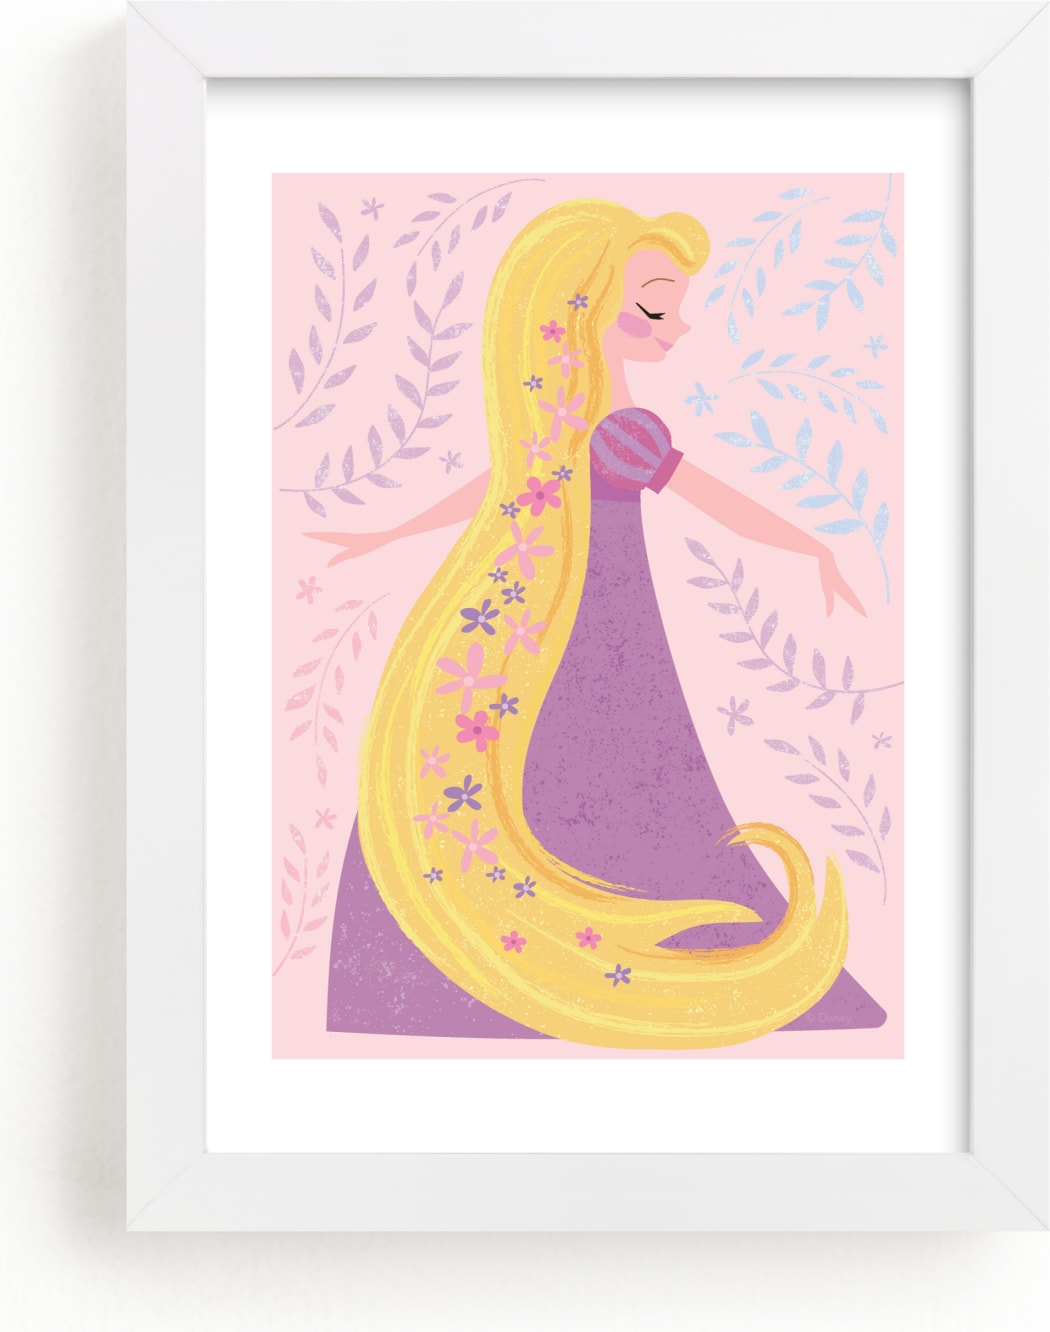 This is a purple disney art by Angela Thompson called Disney Dreaming Rapunzel.